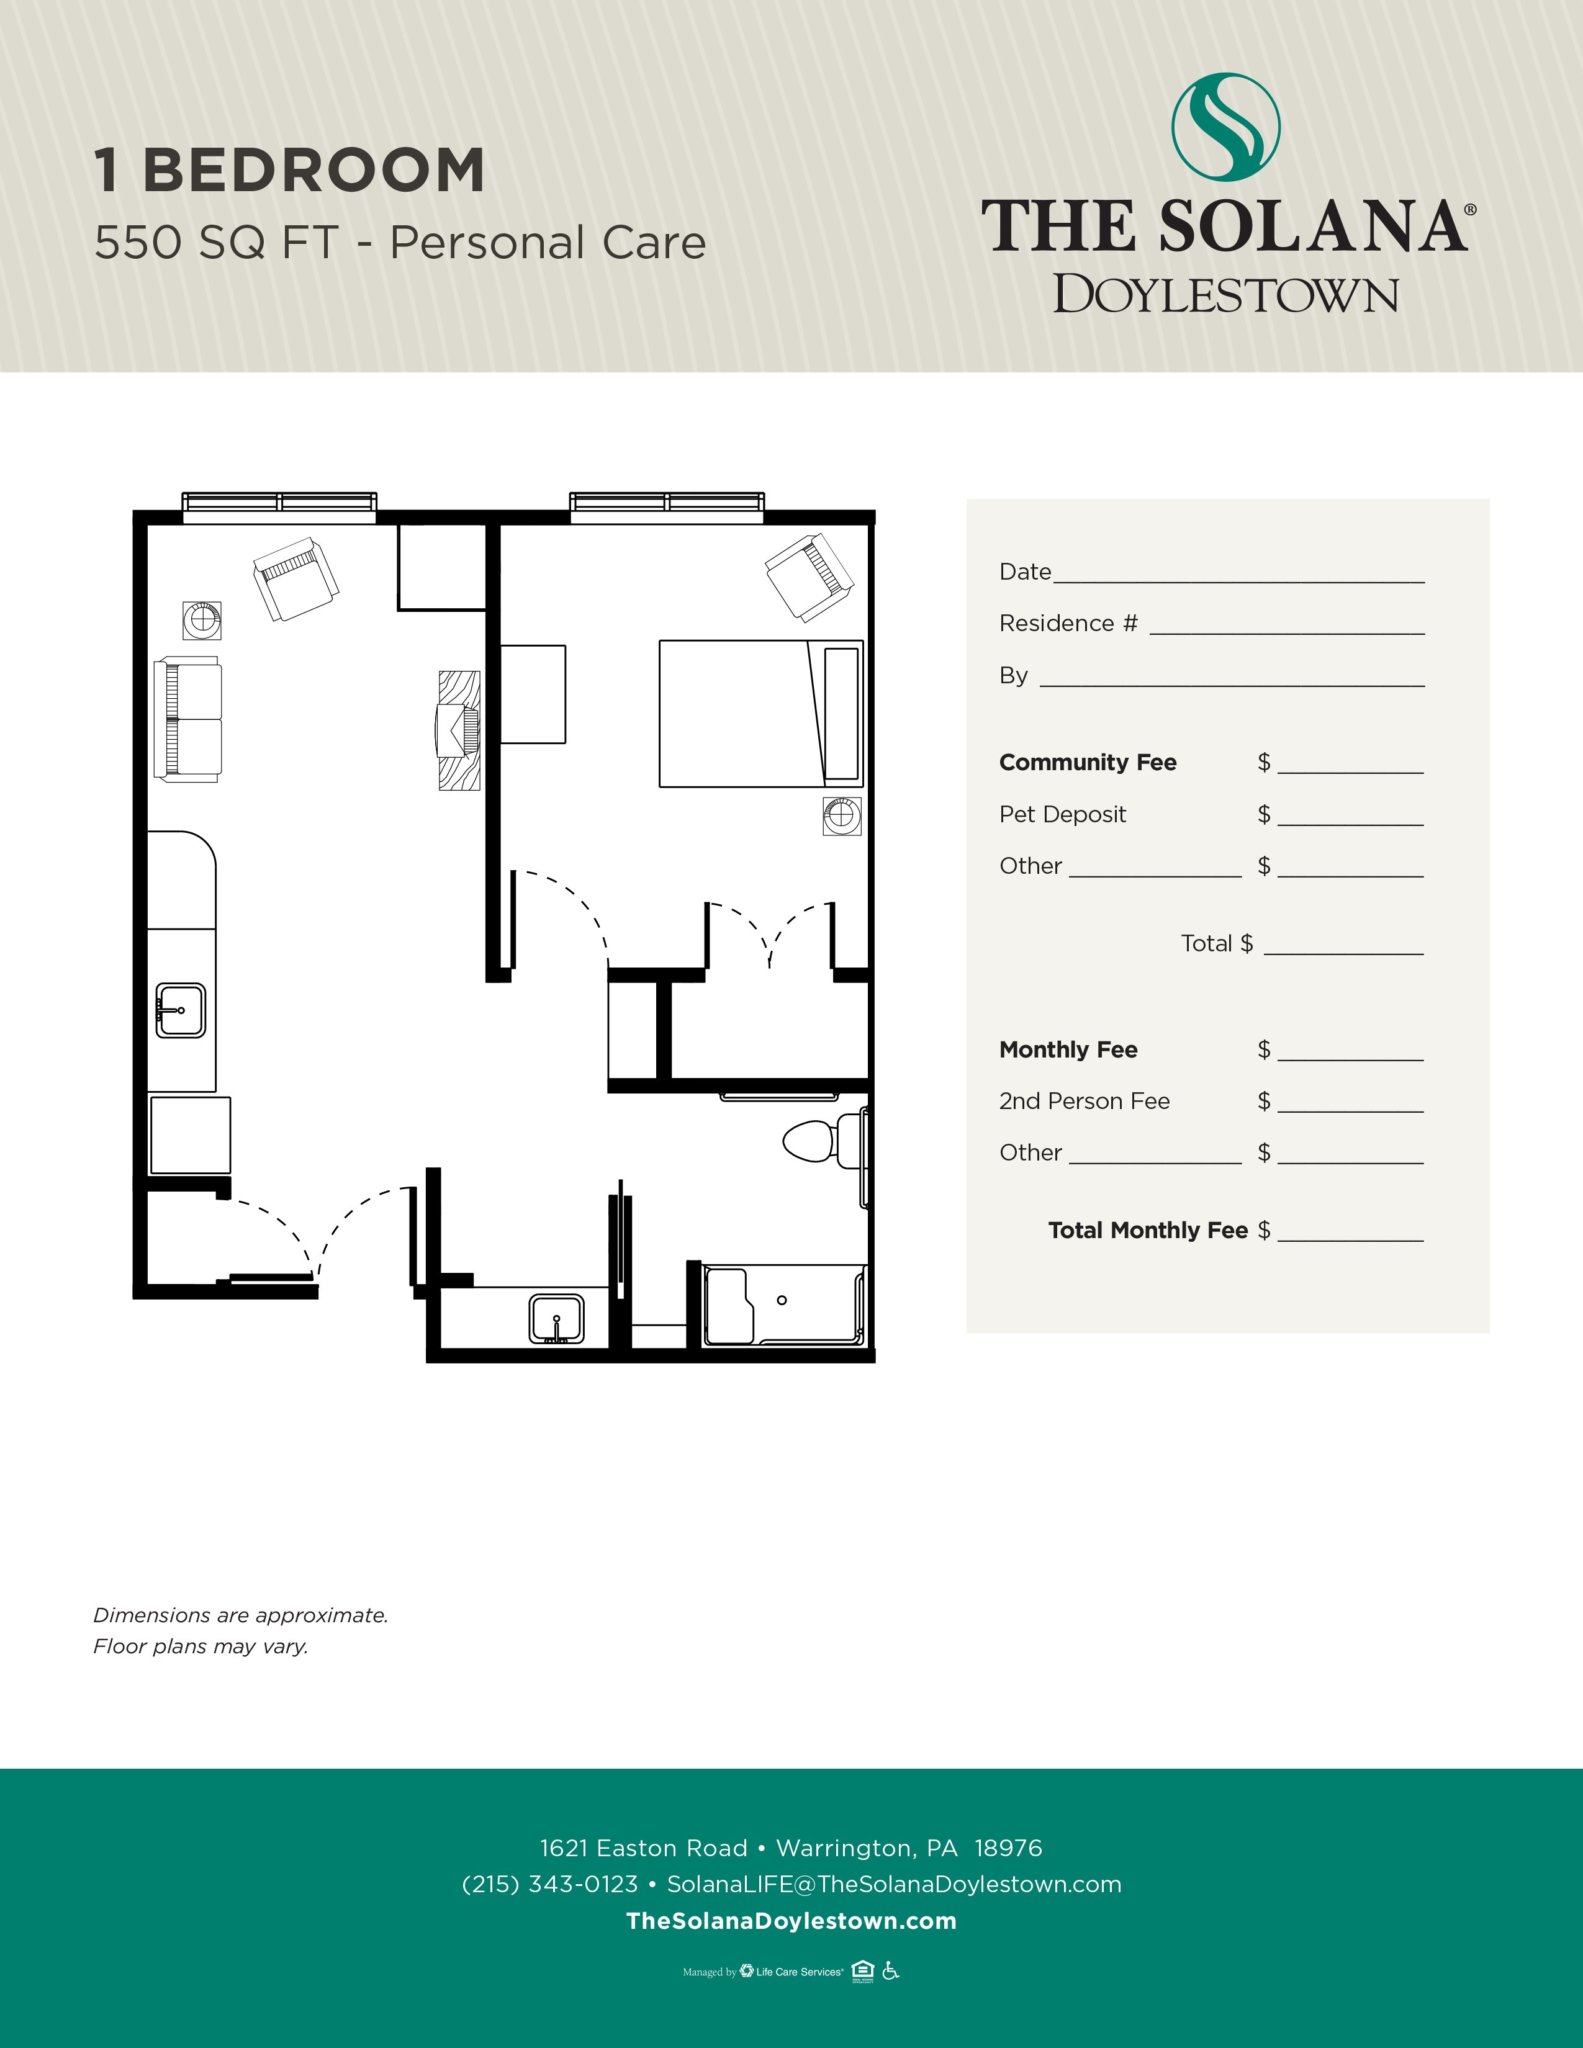 One-bedroom, 550 sq ft unit floor plan at The Solana Doylestown with personal care pricing details.